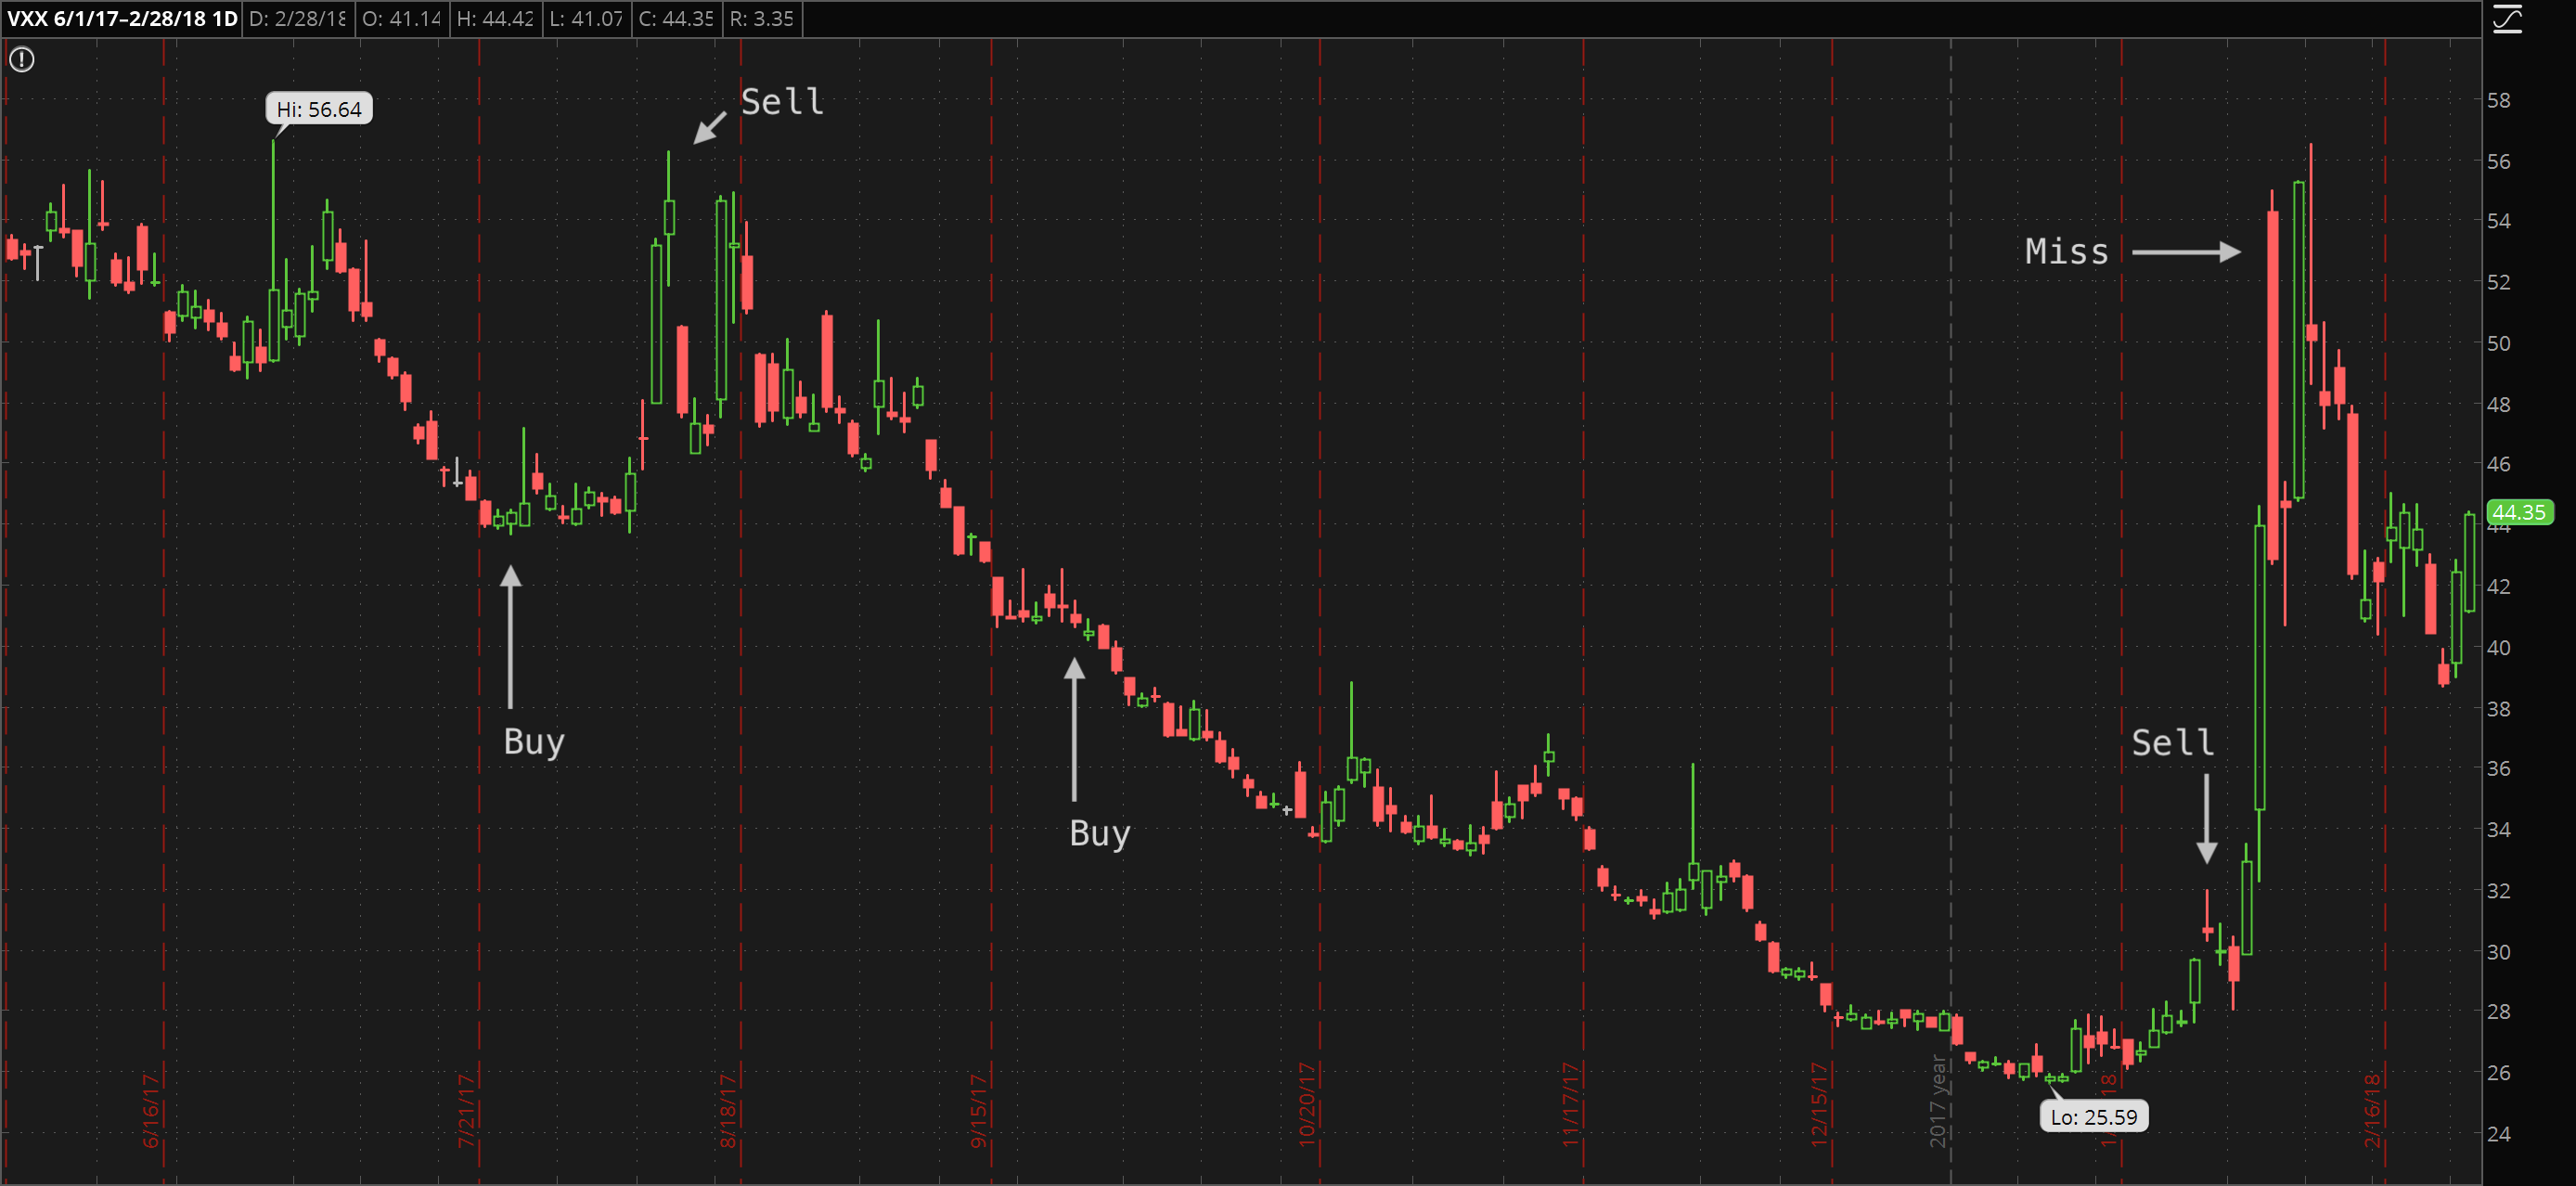 Chart of VXX noting trade times